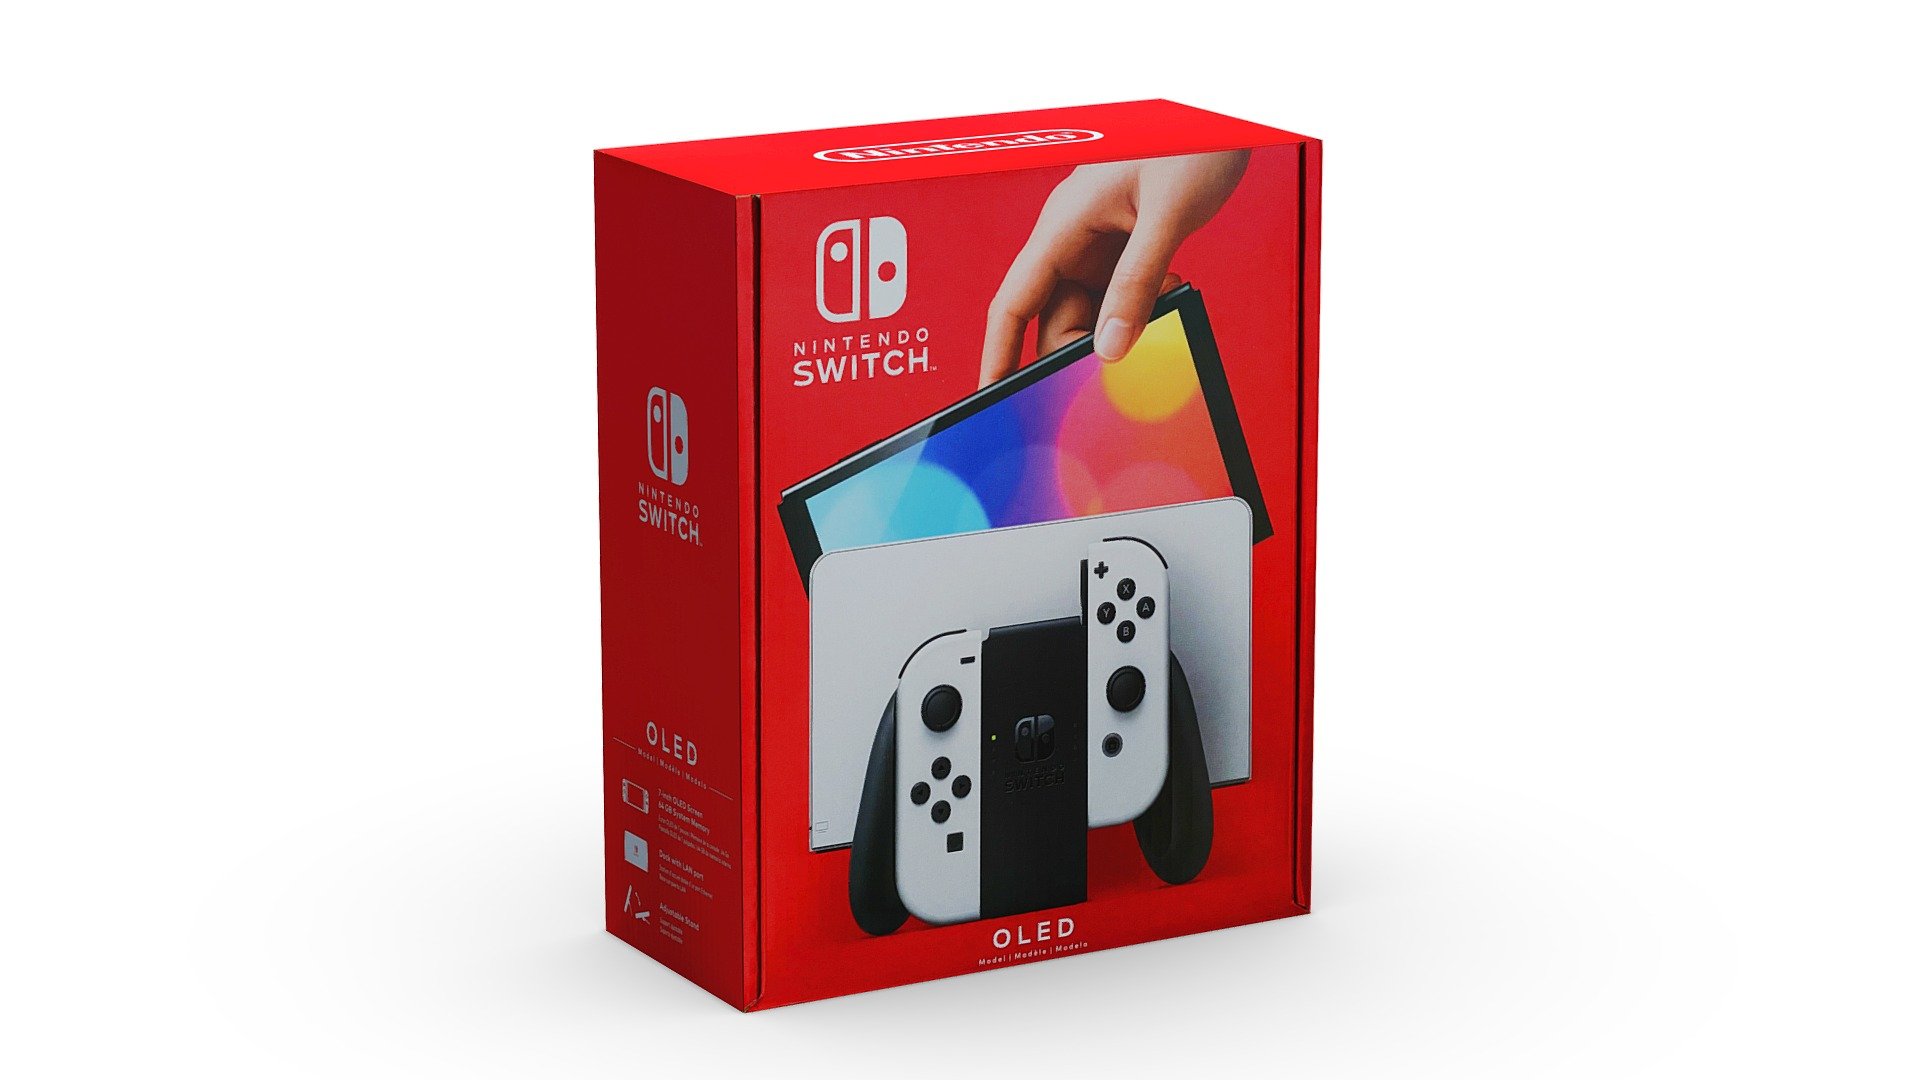 Box for the Nintendo Switch OLED with a 4k texture. Dimensions: 255x208x97mm
Weight: 1453g - Nintendo Switch OLED Box - 3D model by rtql8d 3d model